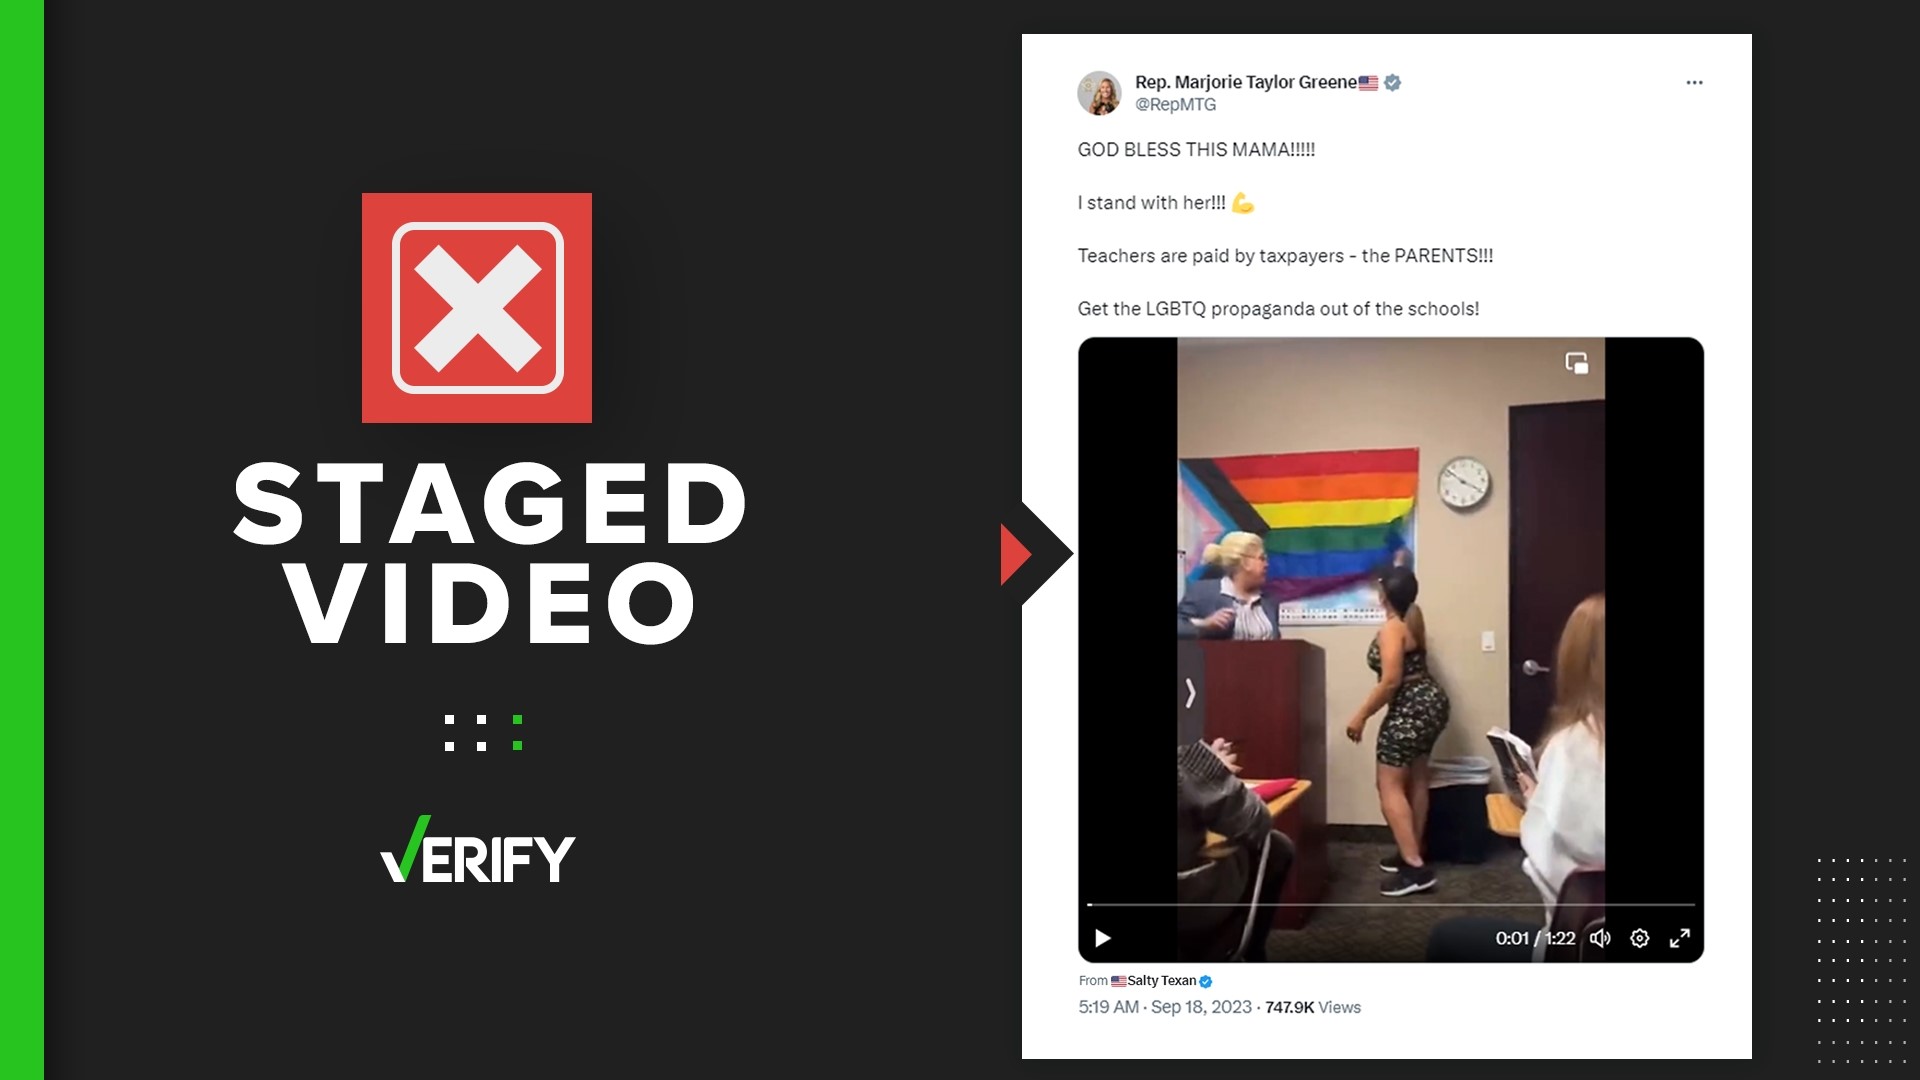 Rep. Marjorie Taylor Greene shared a viral video of a mom tearing down a pride flag in a classroom. It was a staged skit.